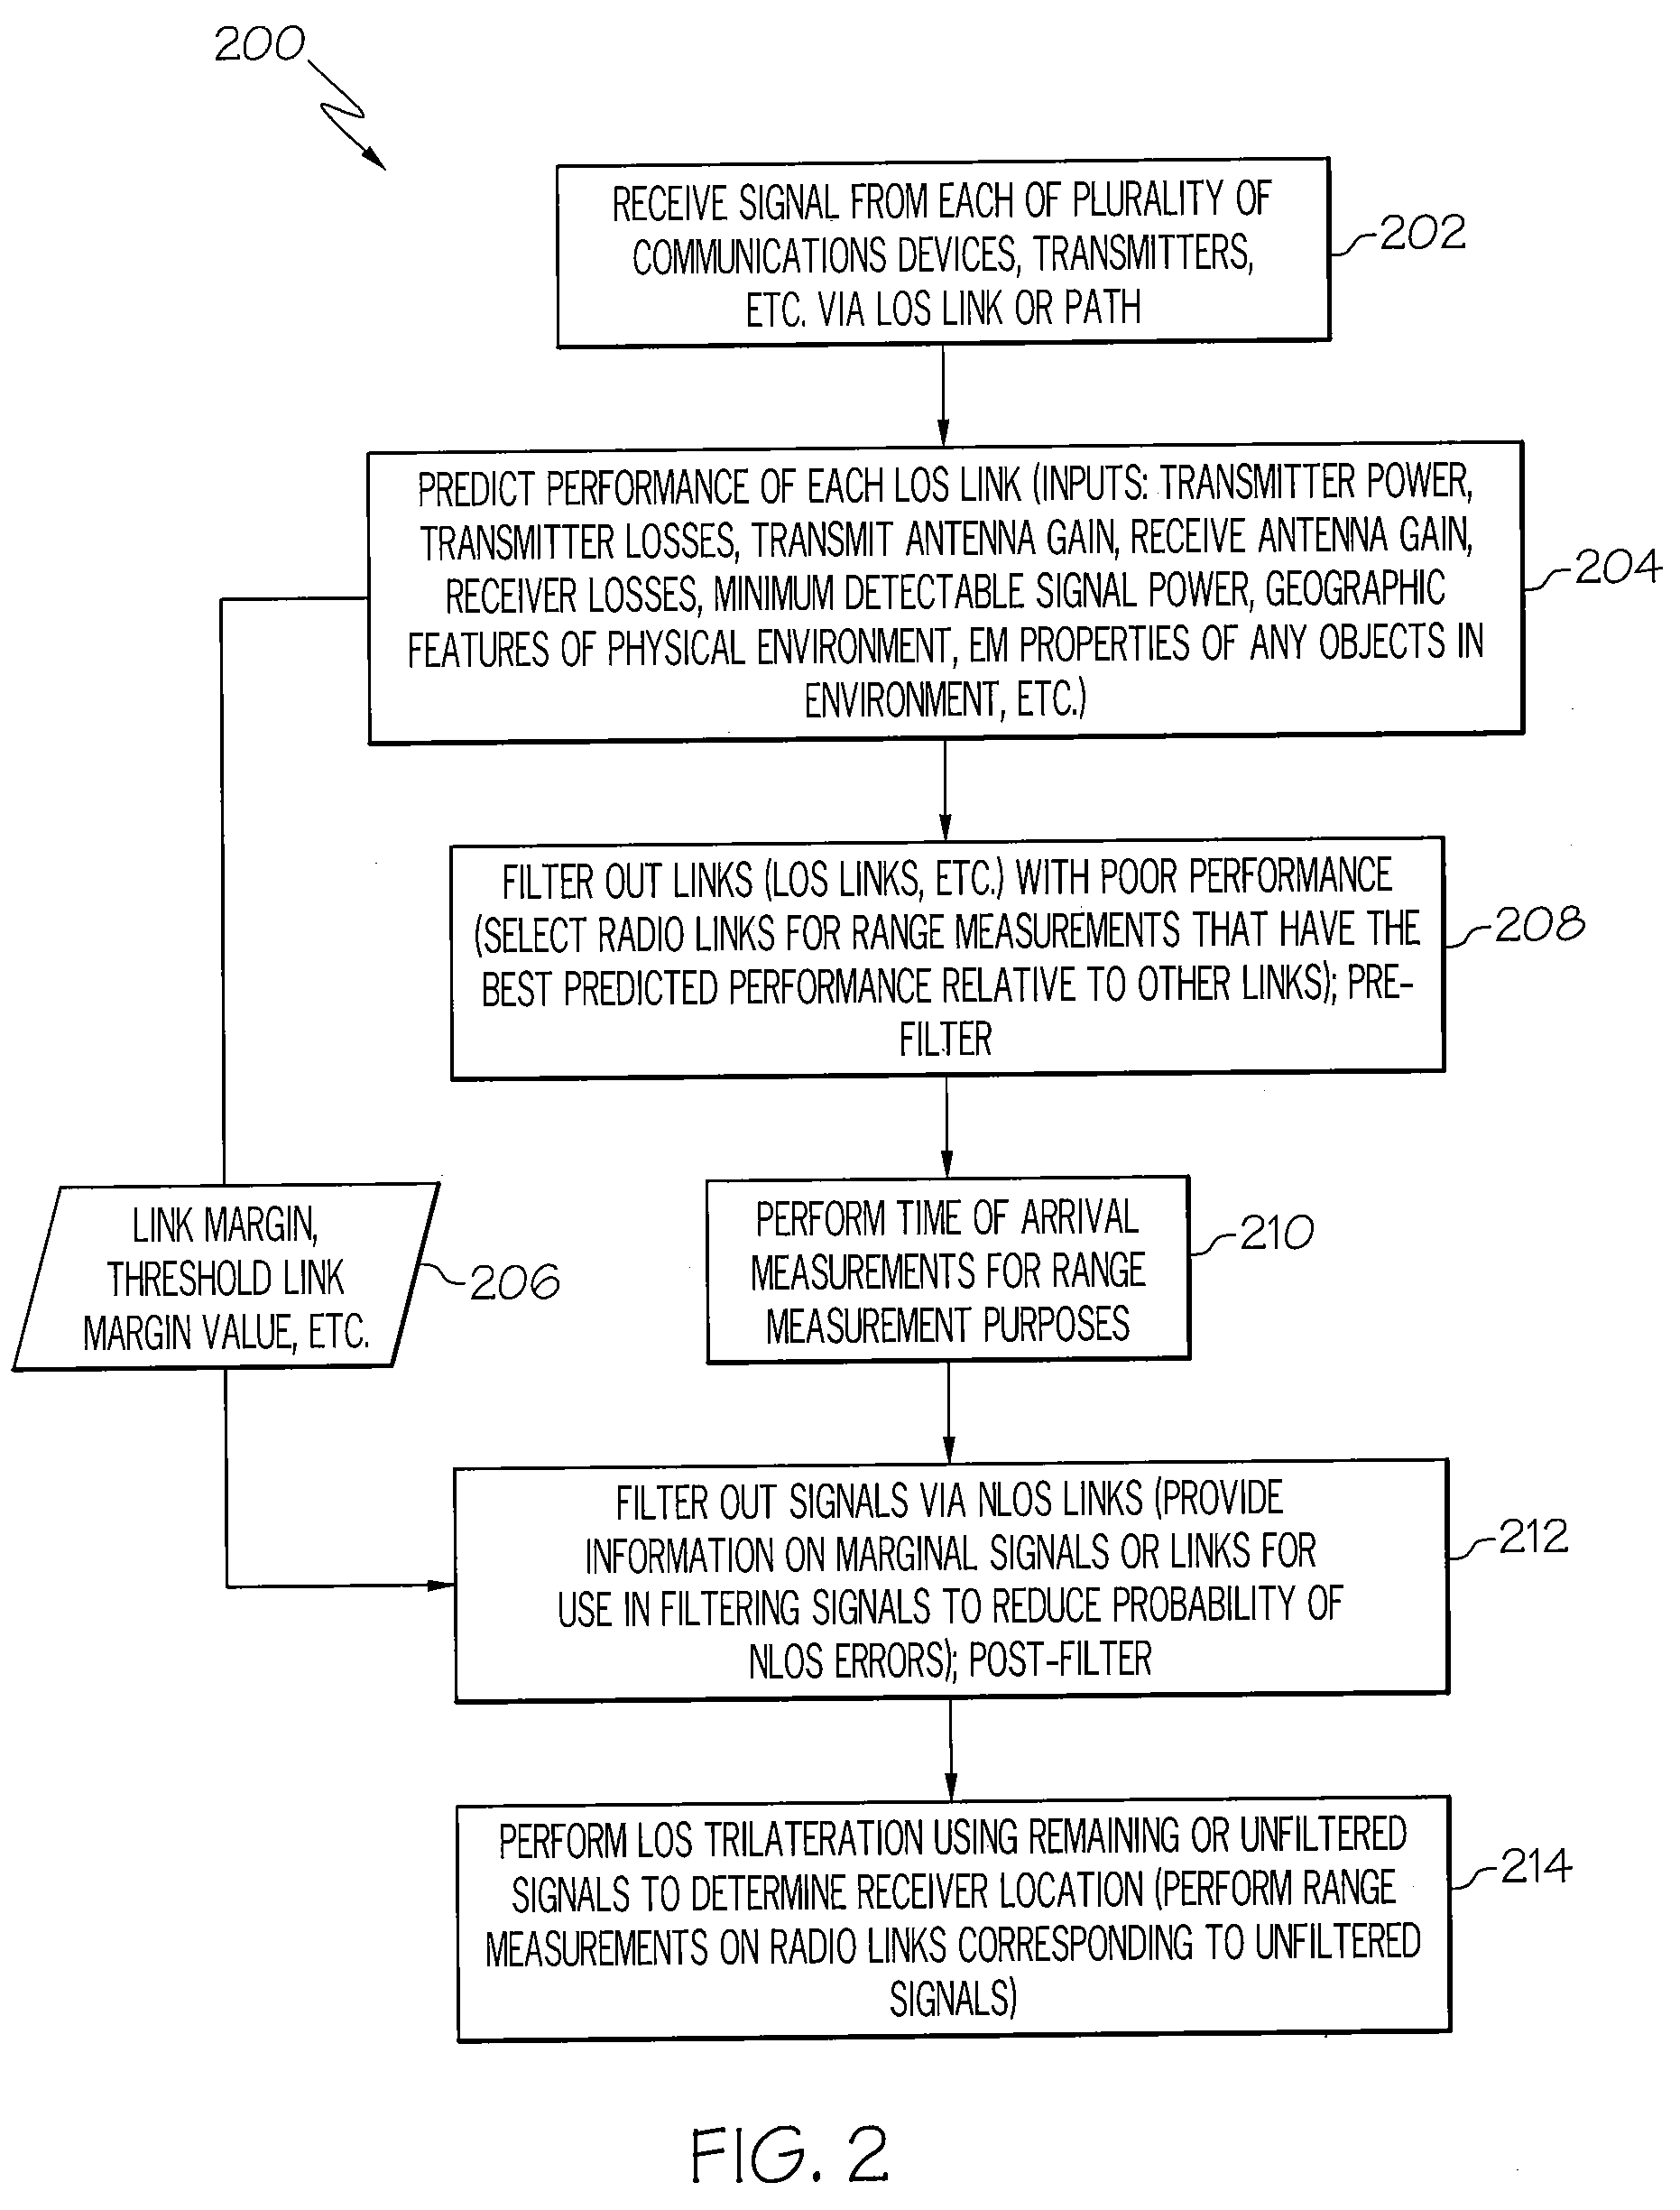 Method and device for trilateration using LOS link prediction and pre-measurement LOS path filtering